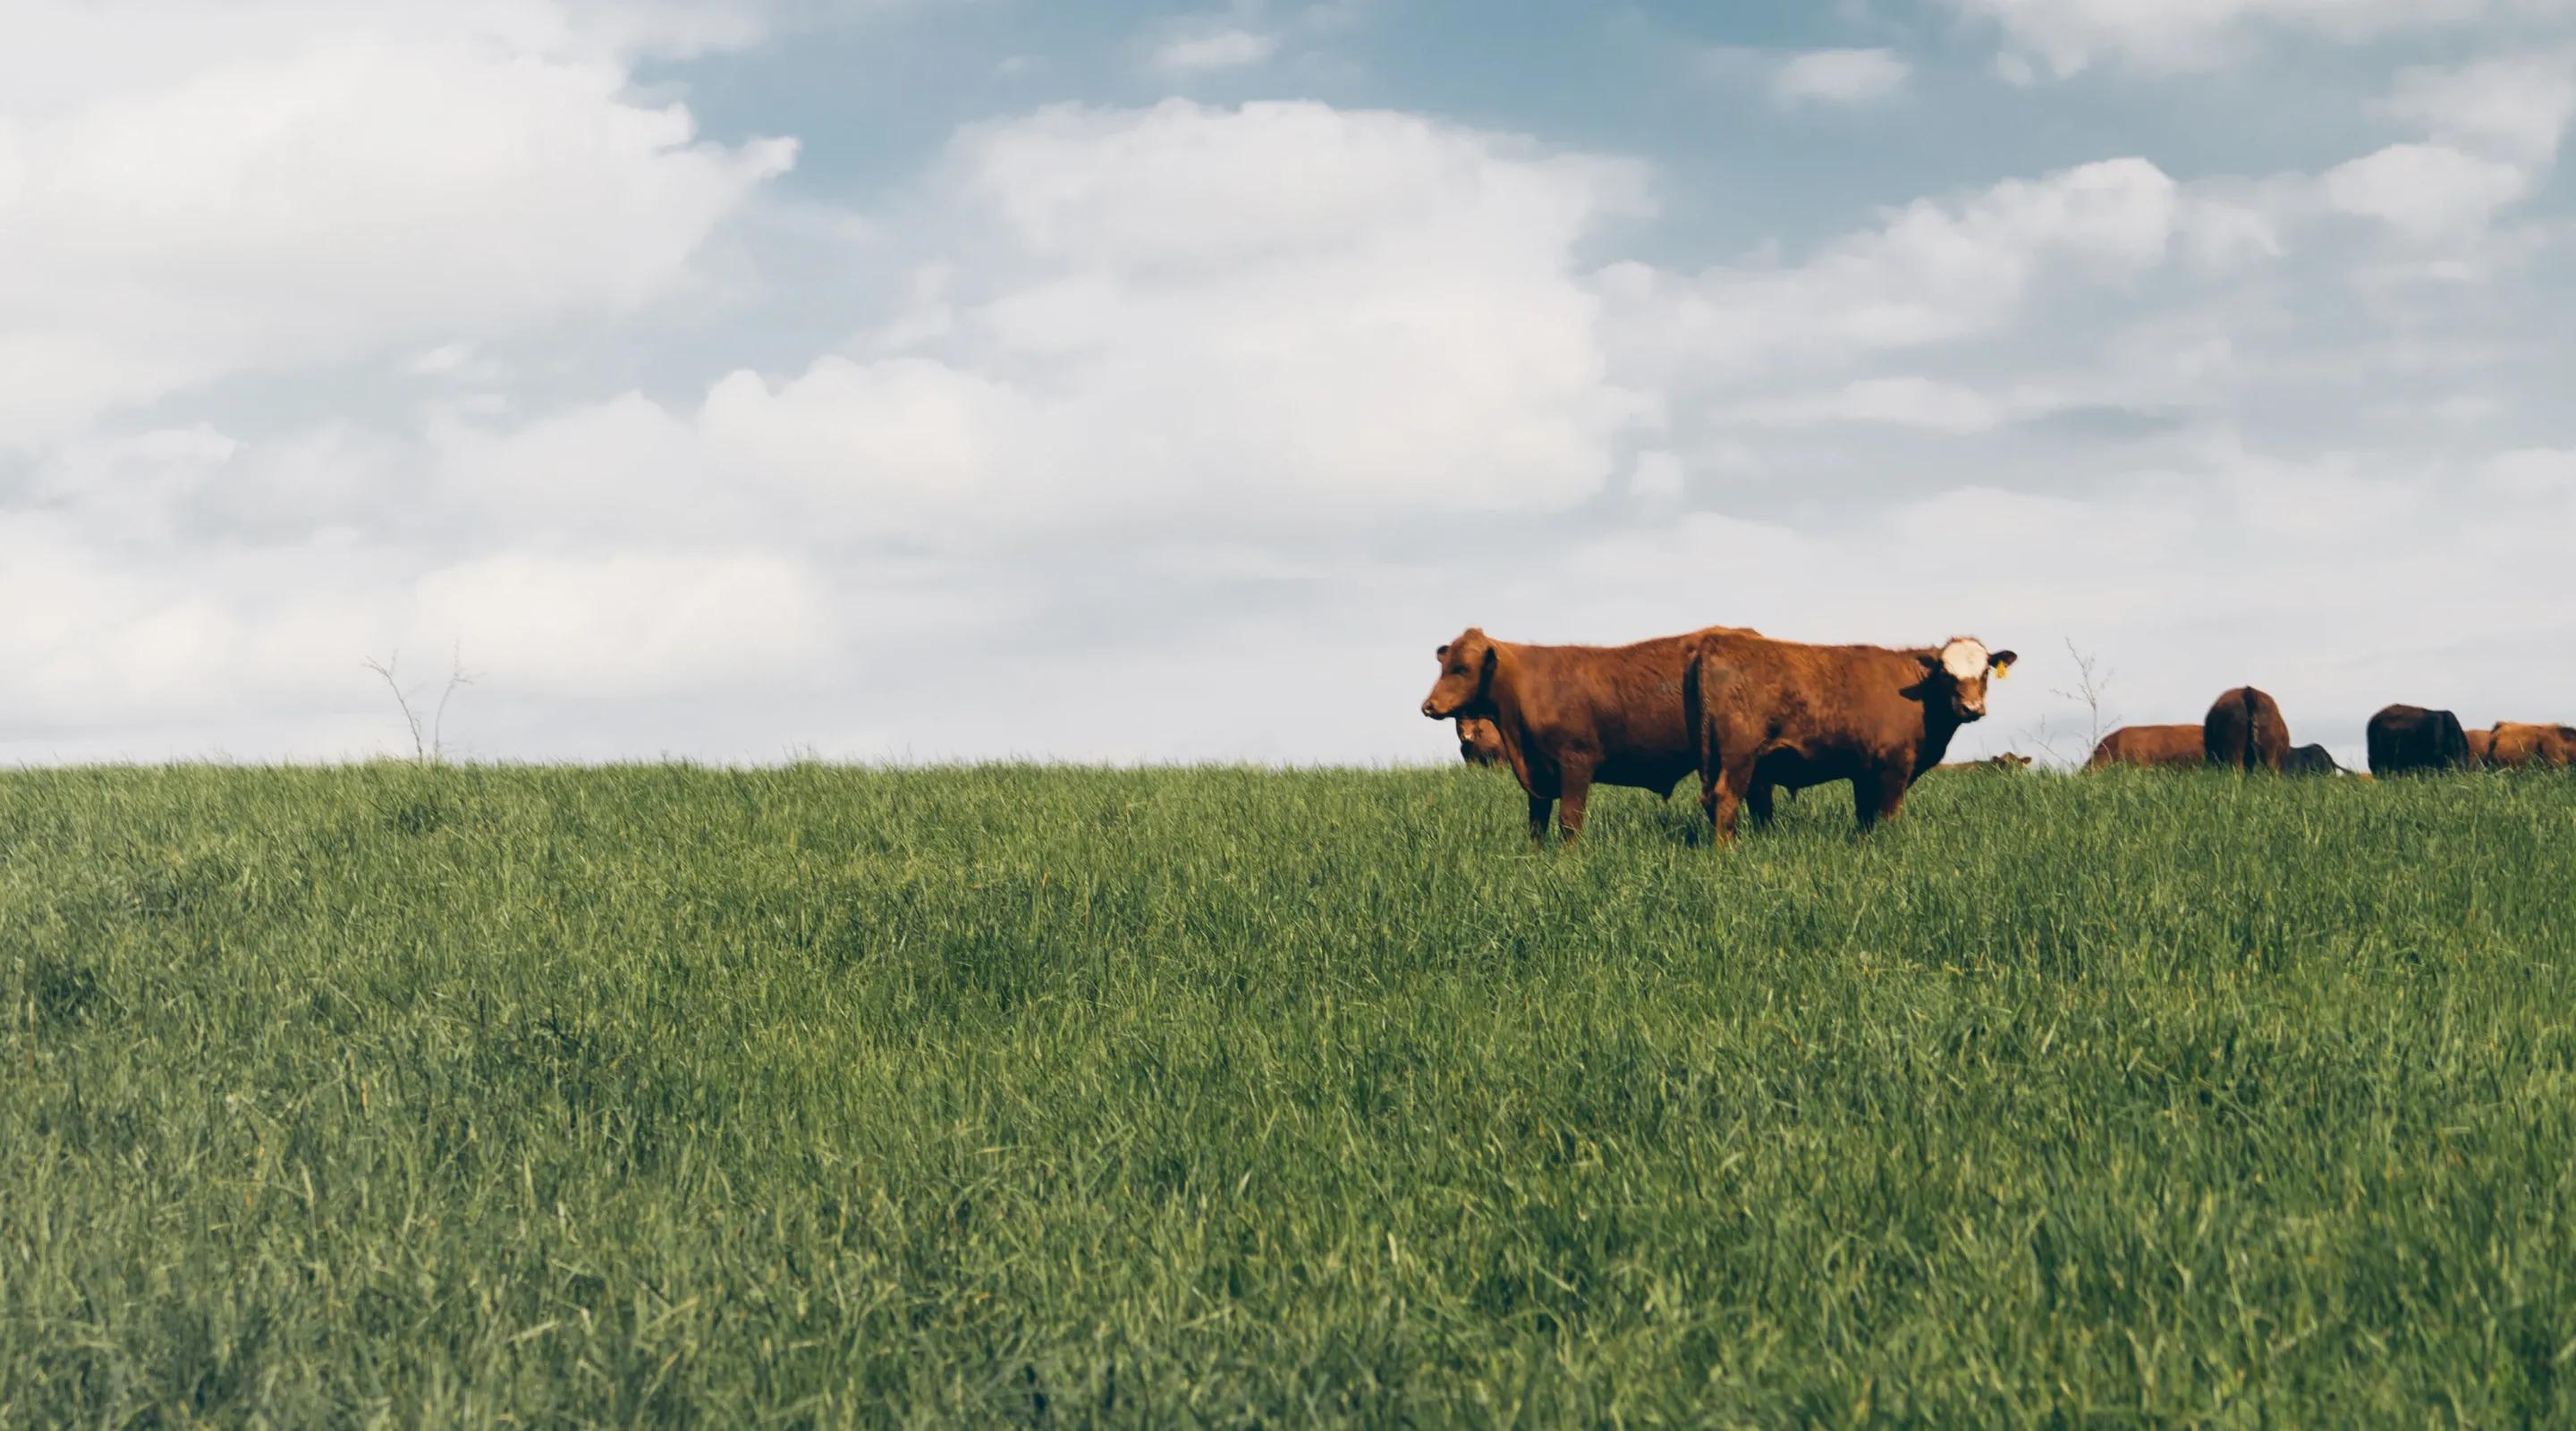 Image of cows in a field.